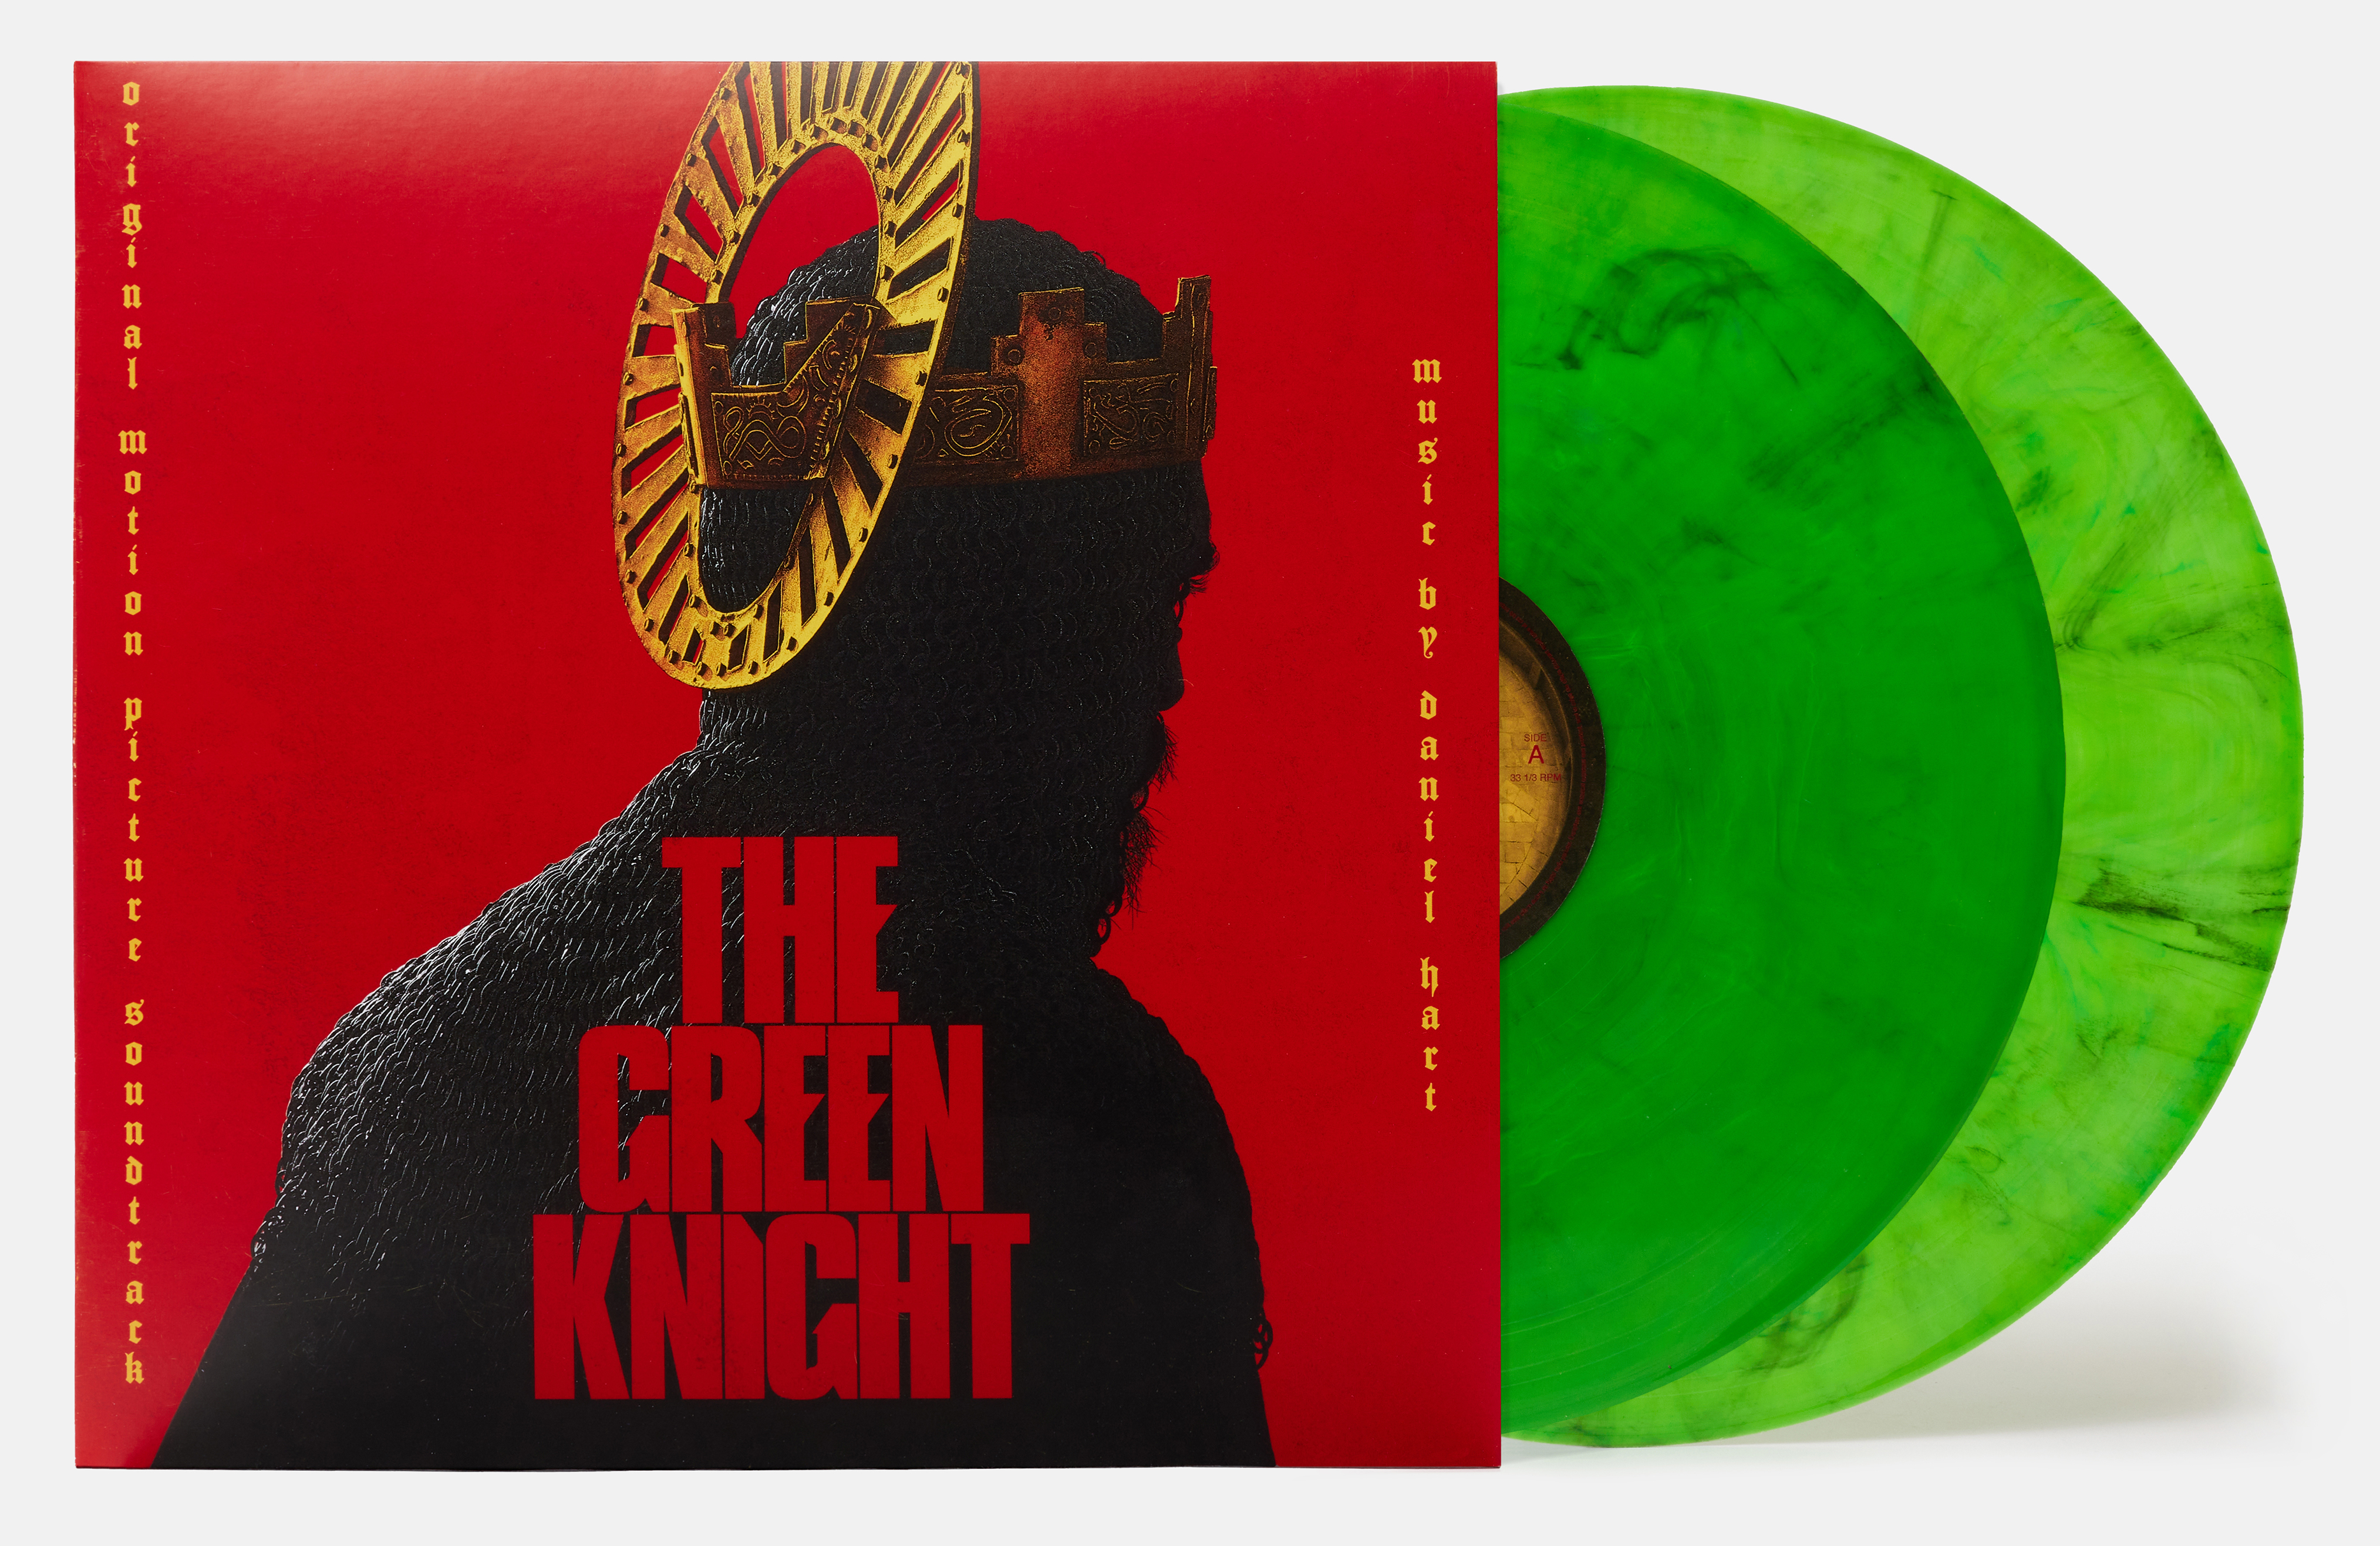 The Green Knight Original Motion Picture Soundtrack